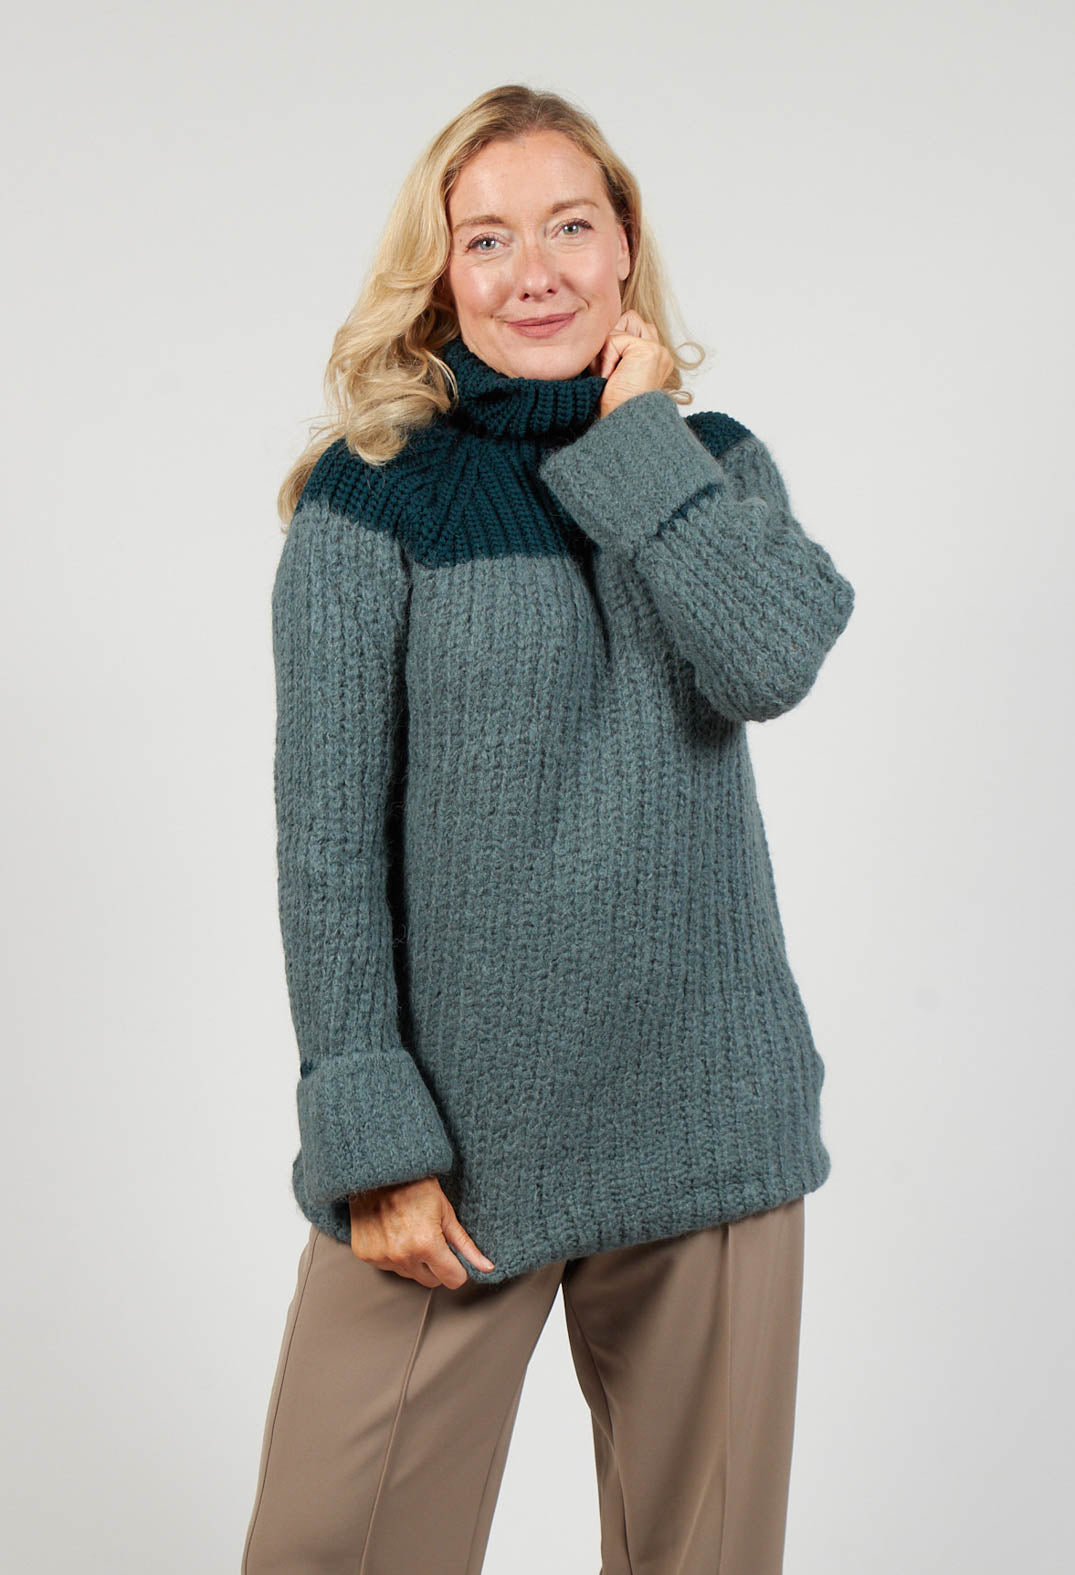 lady smiling wearing a knitted jumper in cypress shade